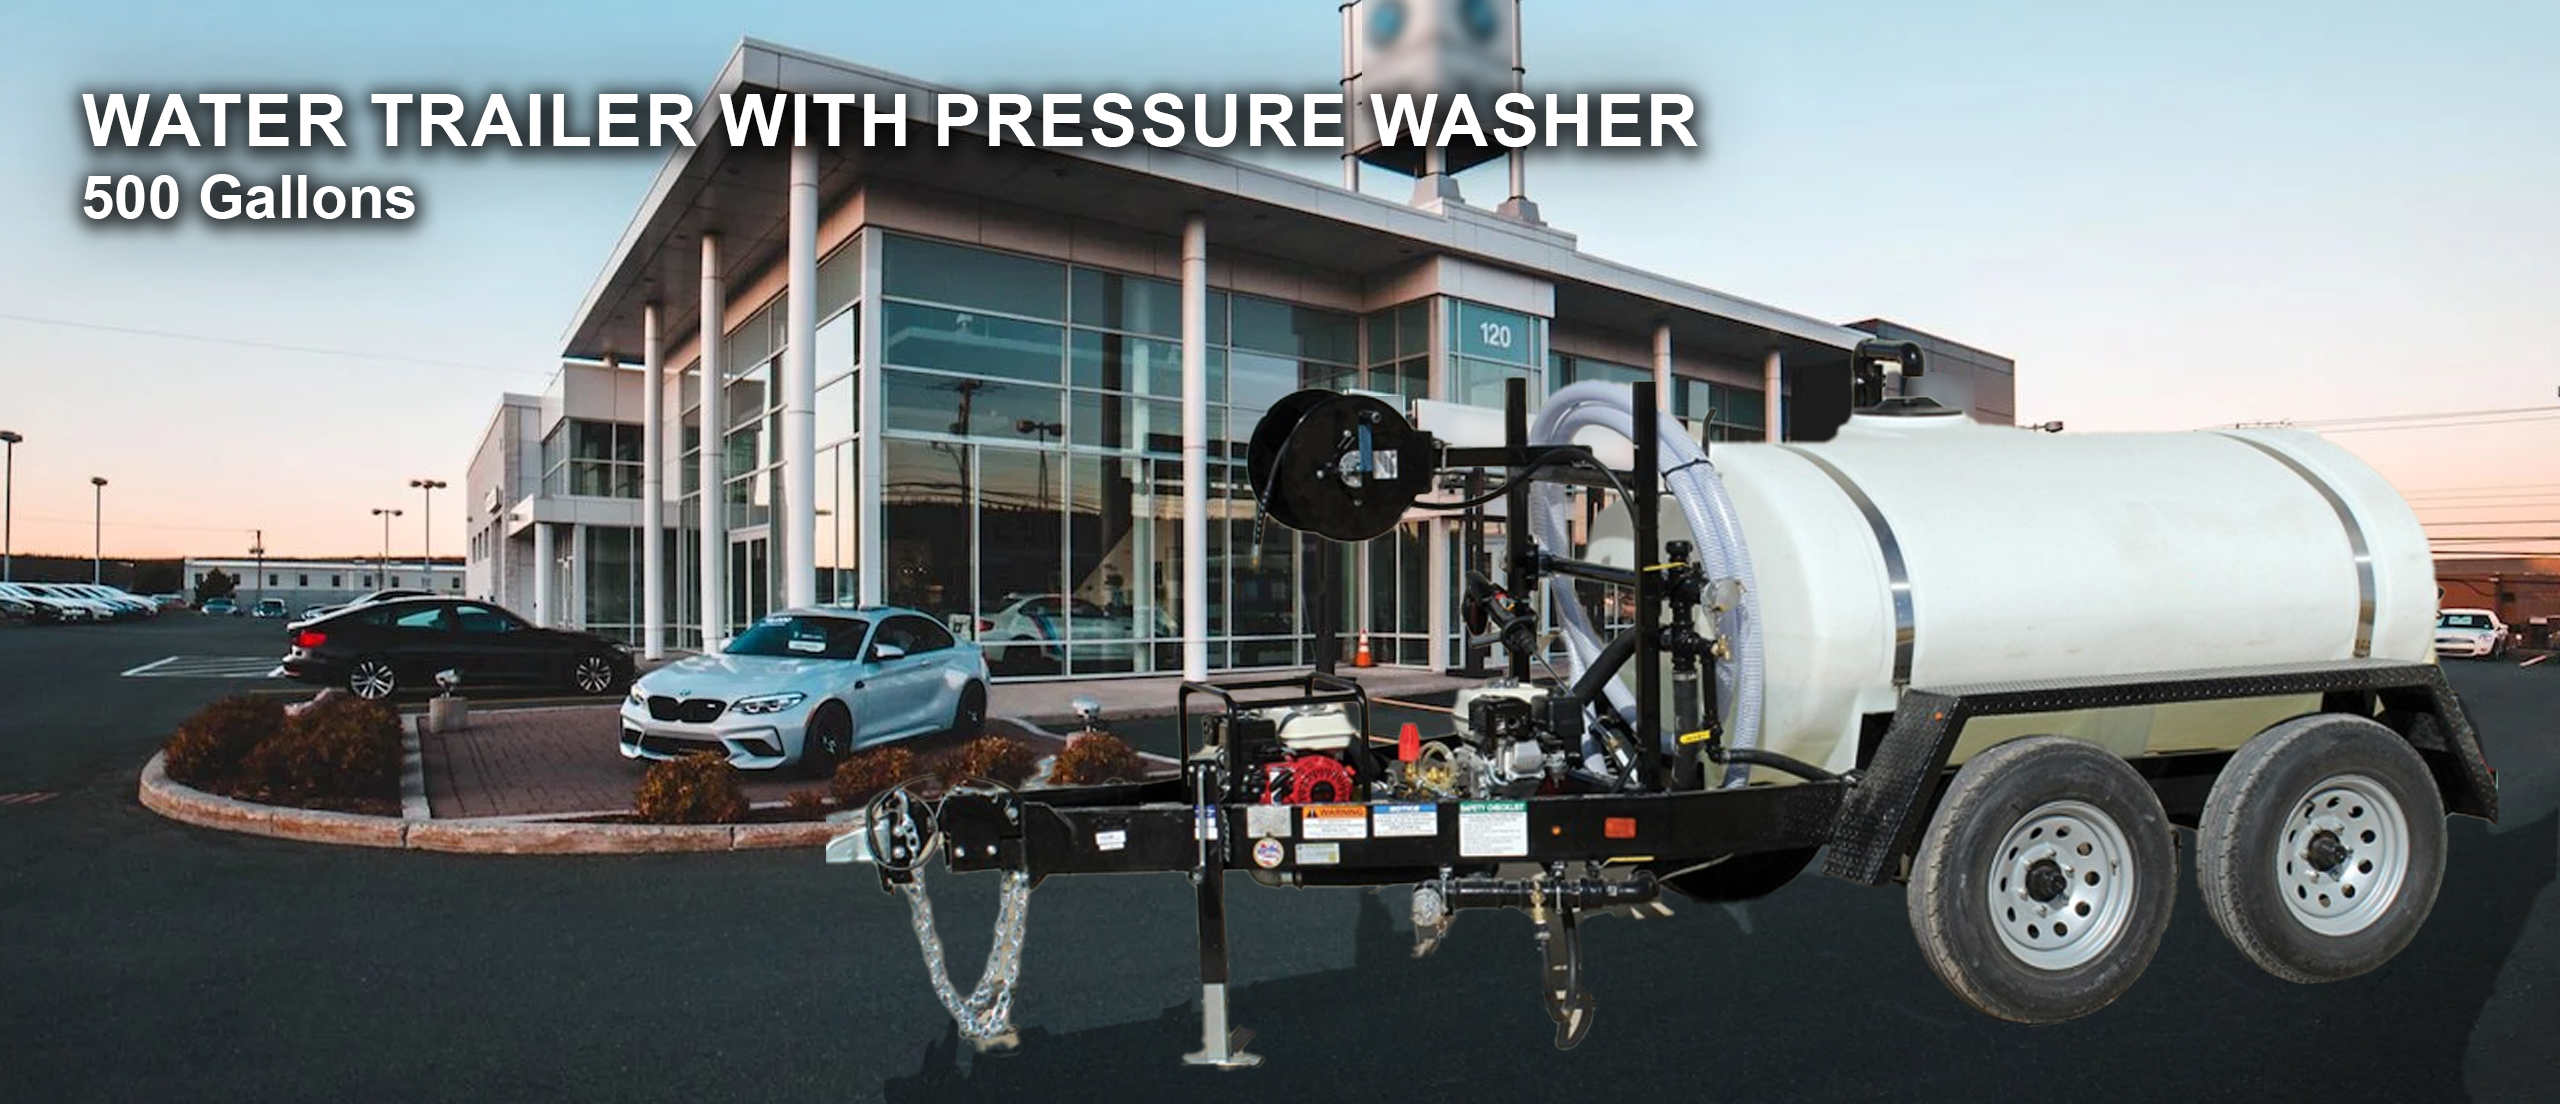 500-gallon-water-trailer-with-pressure-washer-banner-2